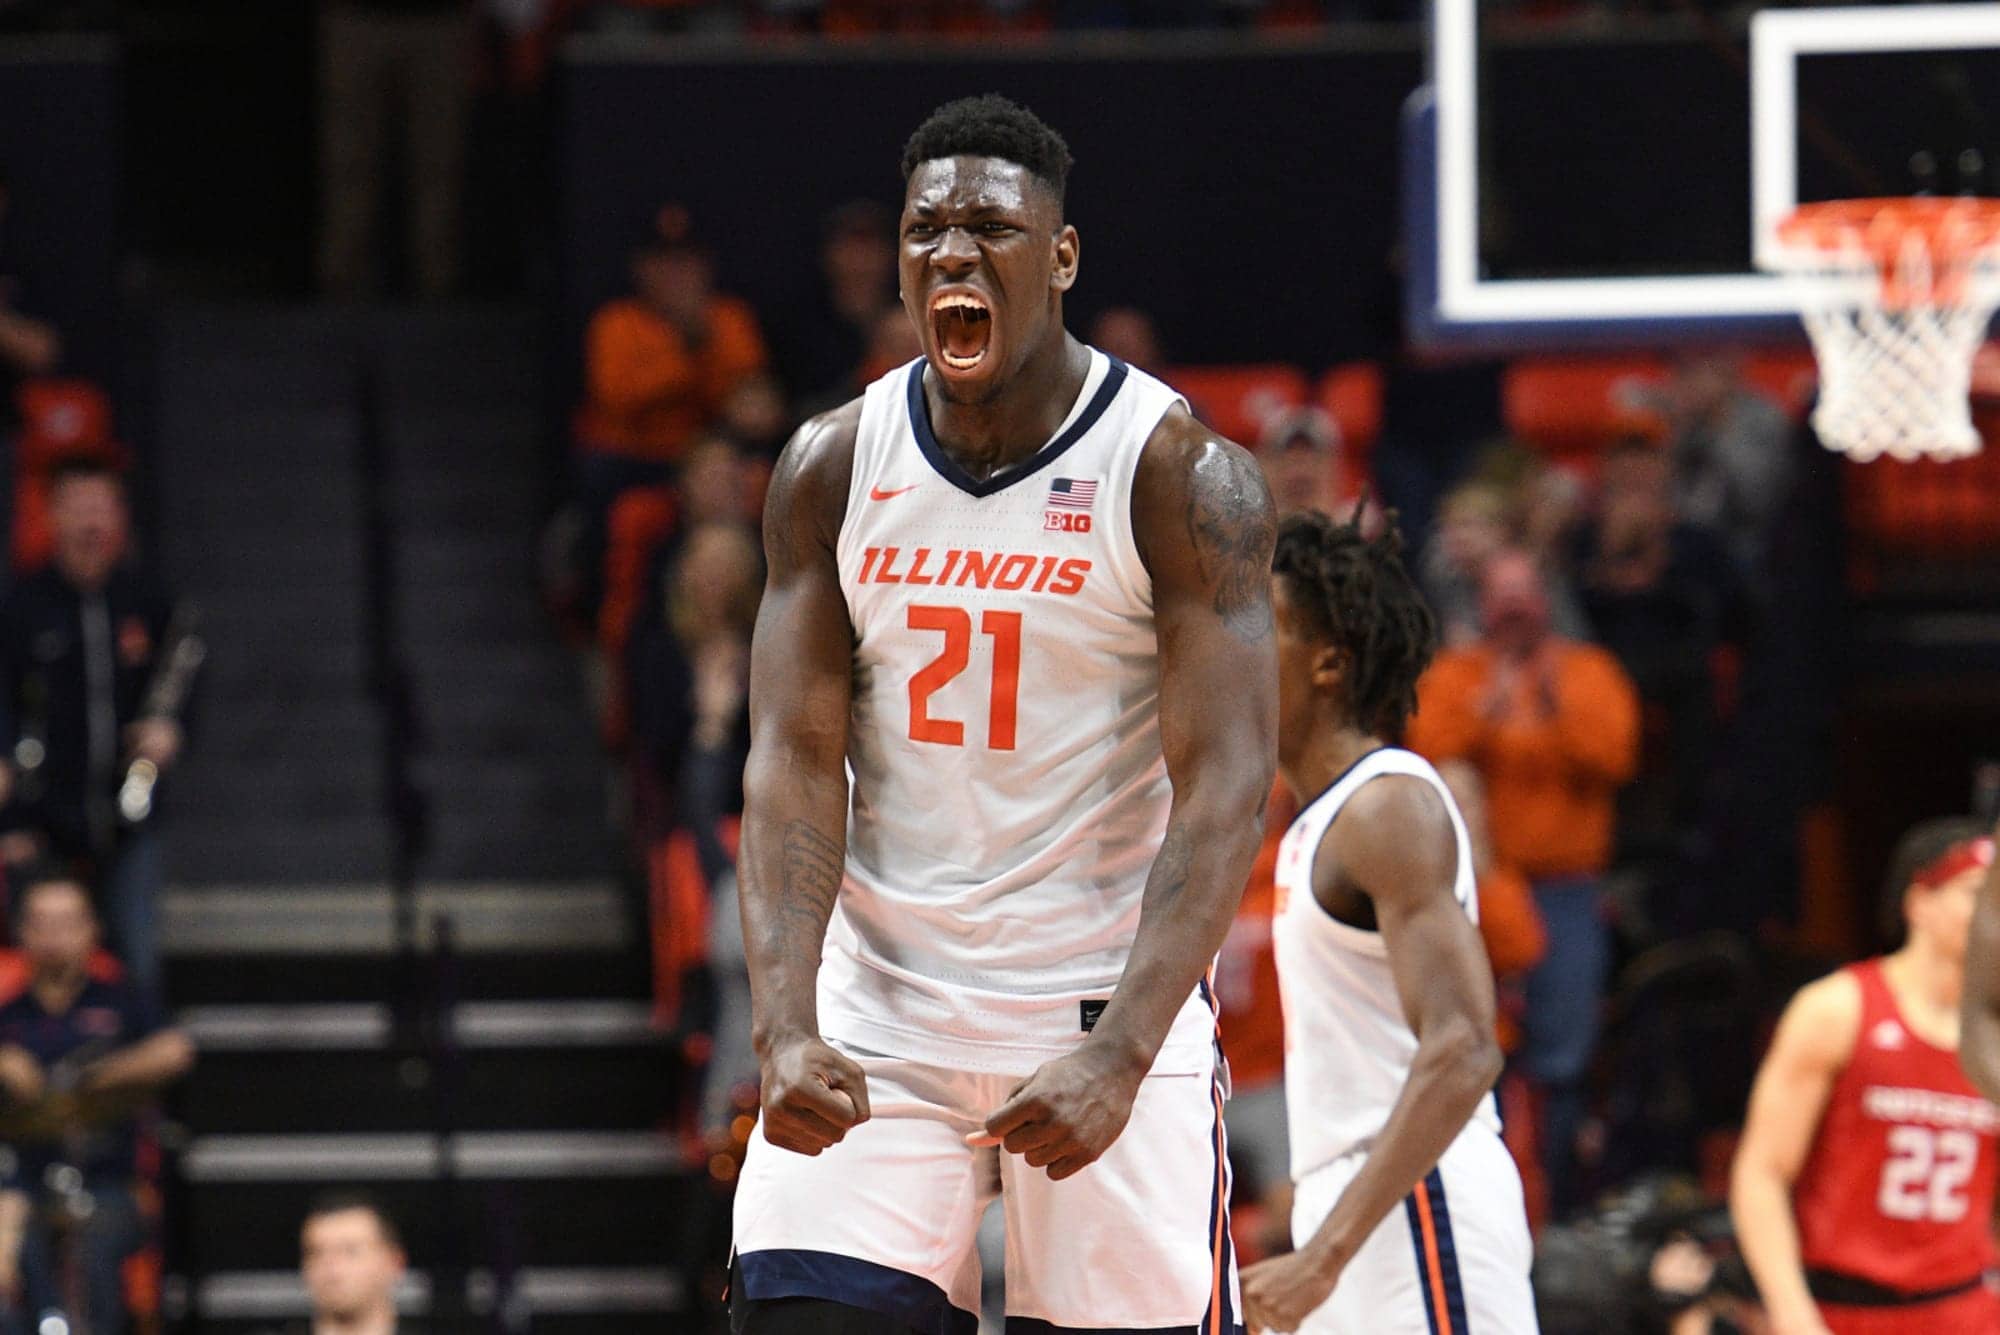 Illinois Fighting Illini basketball player yelling and flexing in celebration